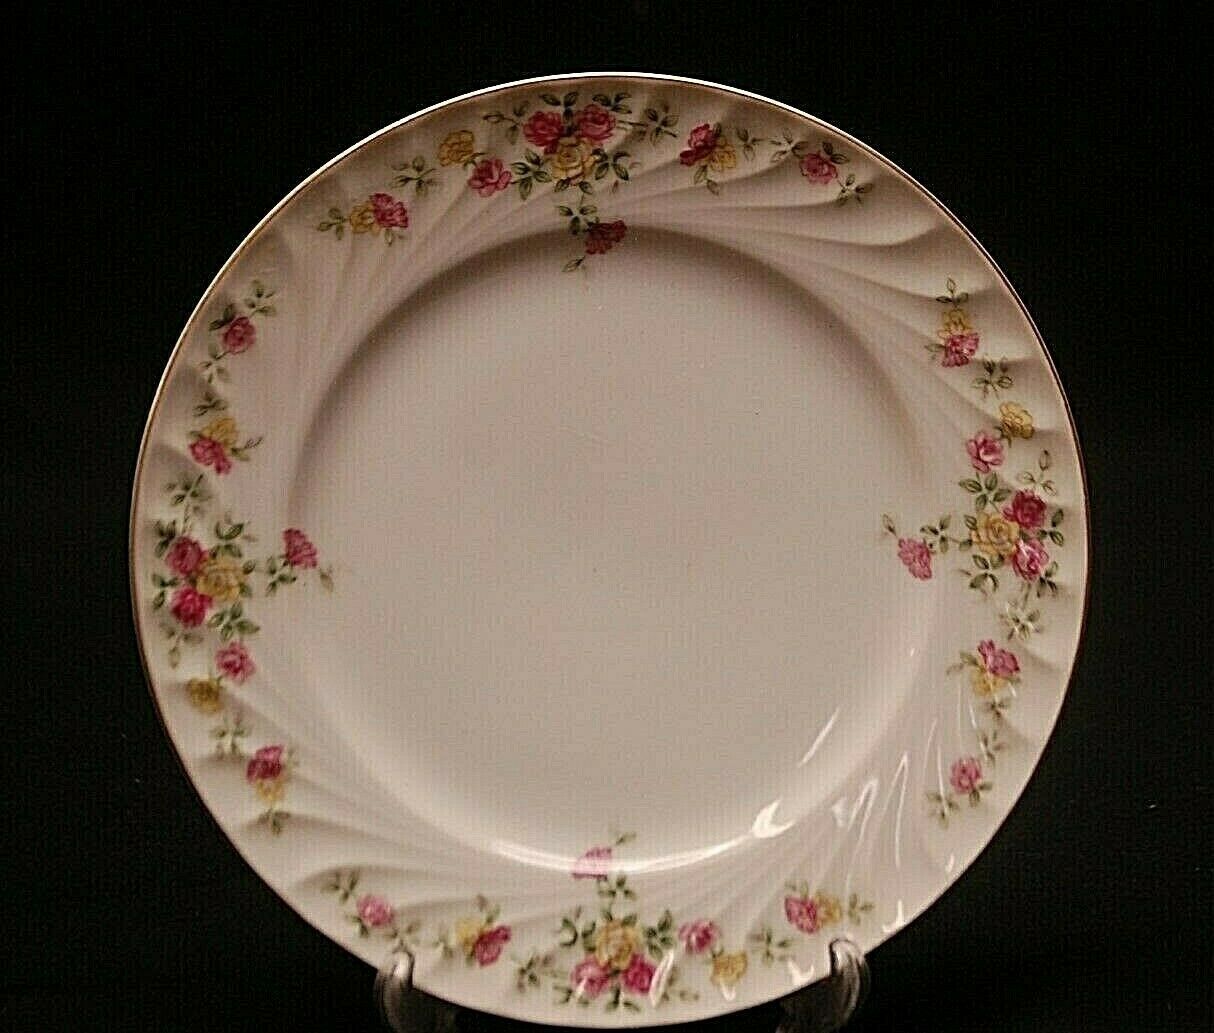 Primary image for Picadilly by Harmony House China 7-3/4" Salad Plate Pink & Yellow Roses Swirl